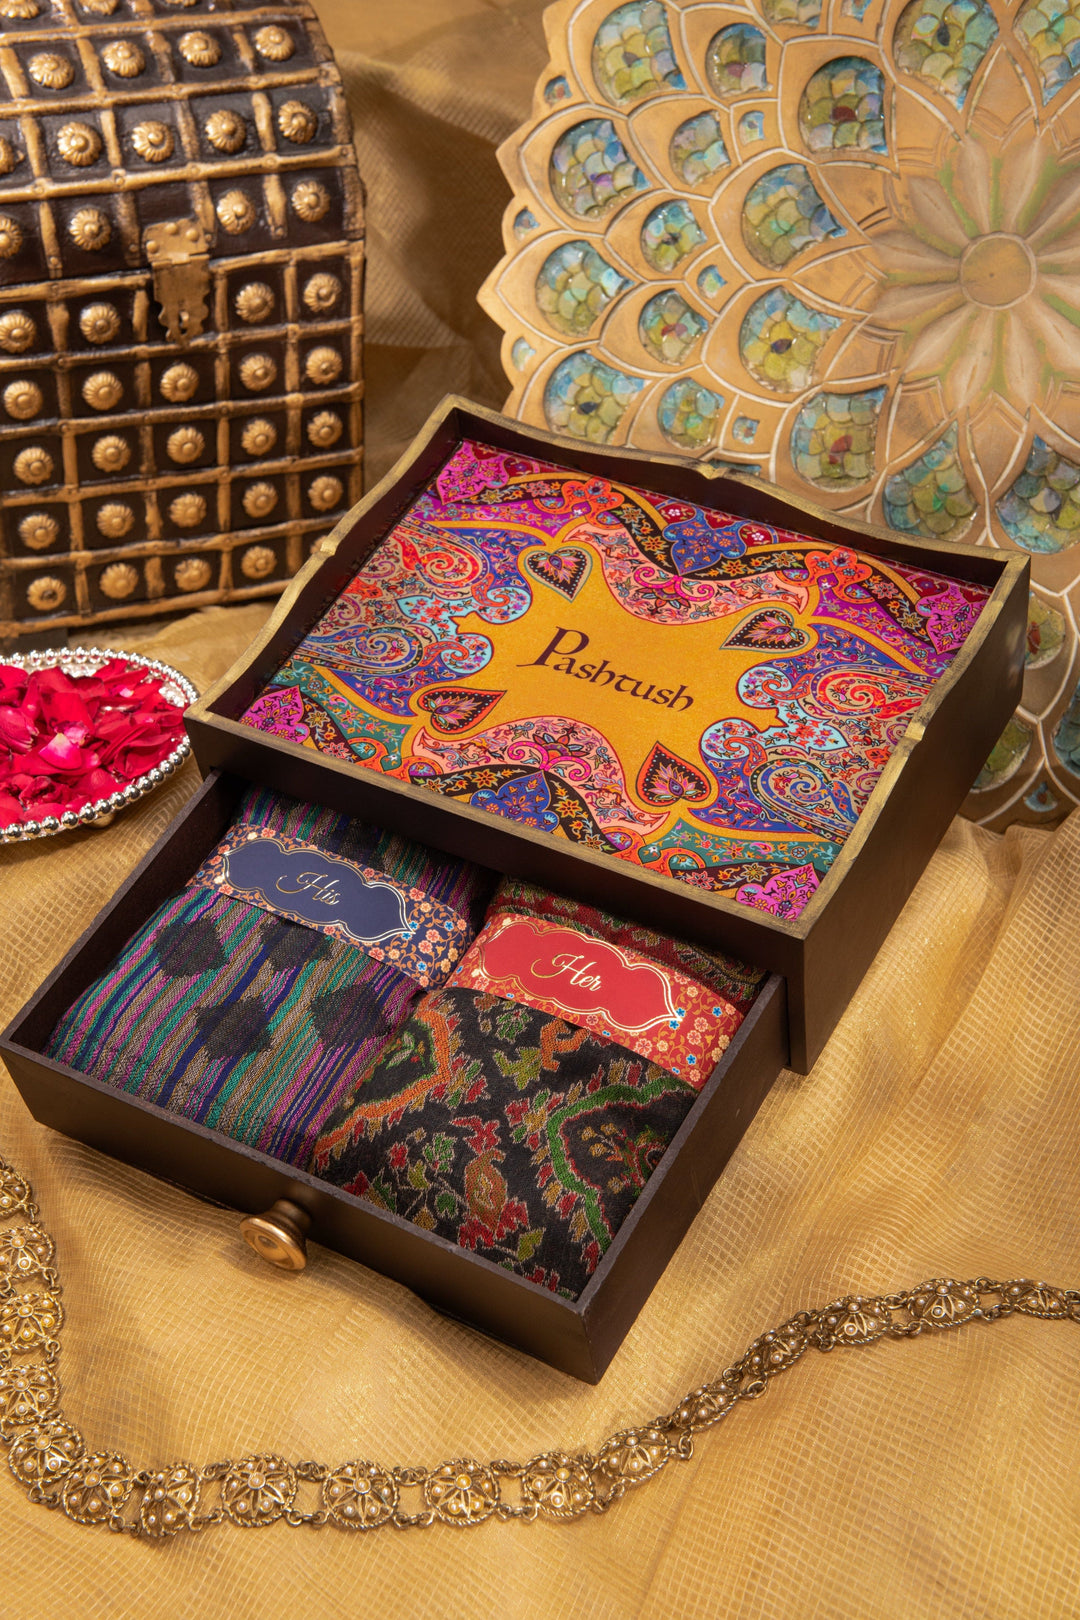 Pashtush India Gift Pack Pashtush His And Her Gift Set Of Pure Wool Reversible Stole And Extra Fine Ethnic Shawl With Wooden Chester Box, Multicolour